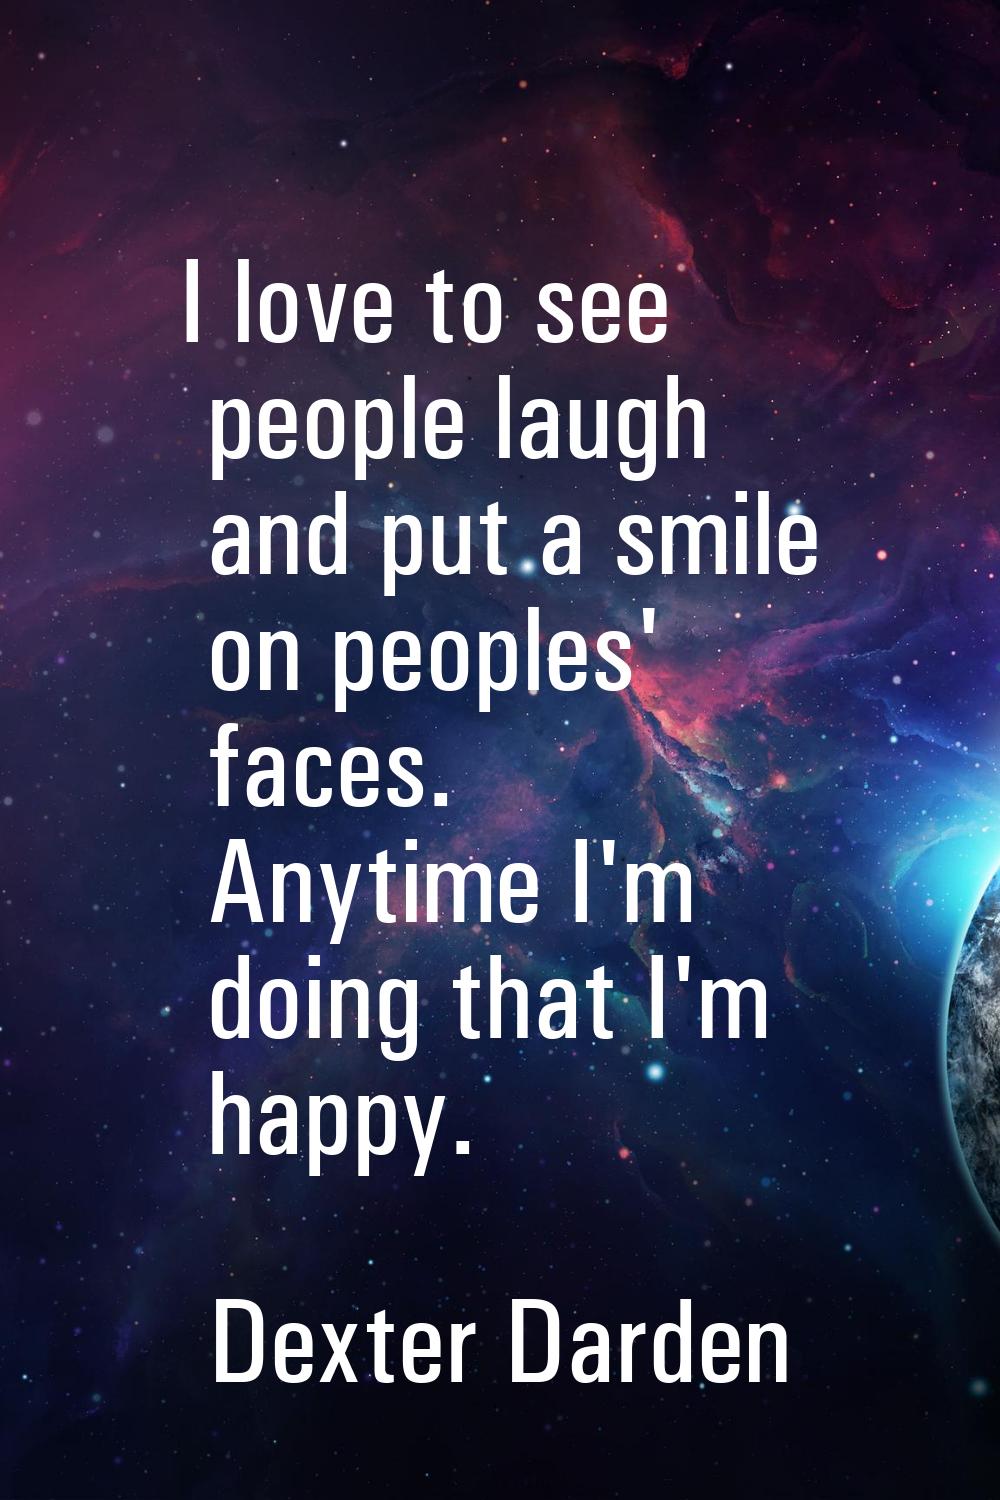 I love to see people laugh and put a smile on peoples' faces. Anytime I'm doing that I'm happy.